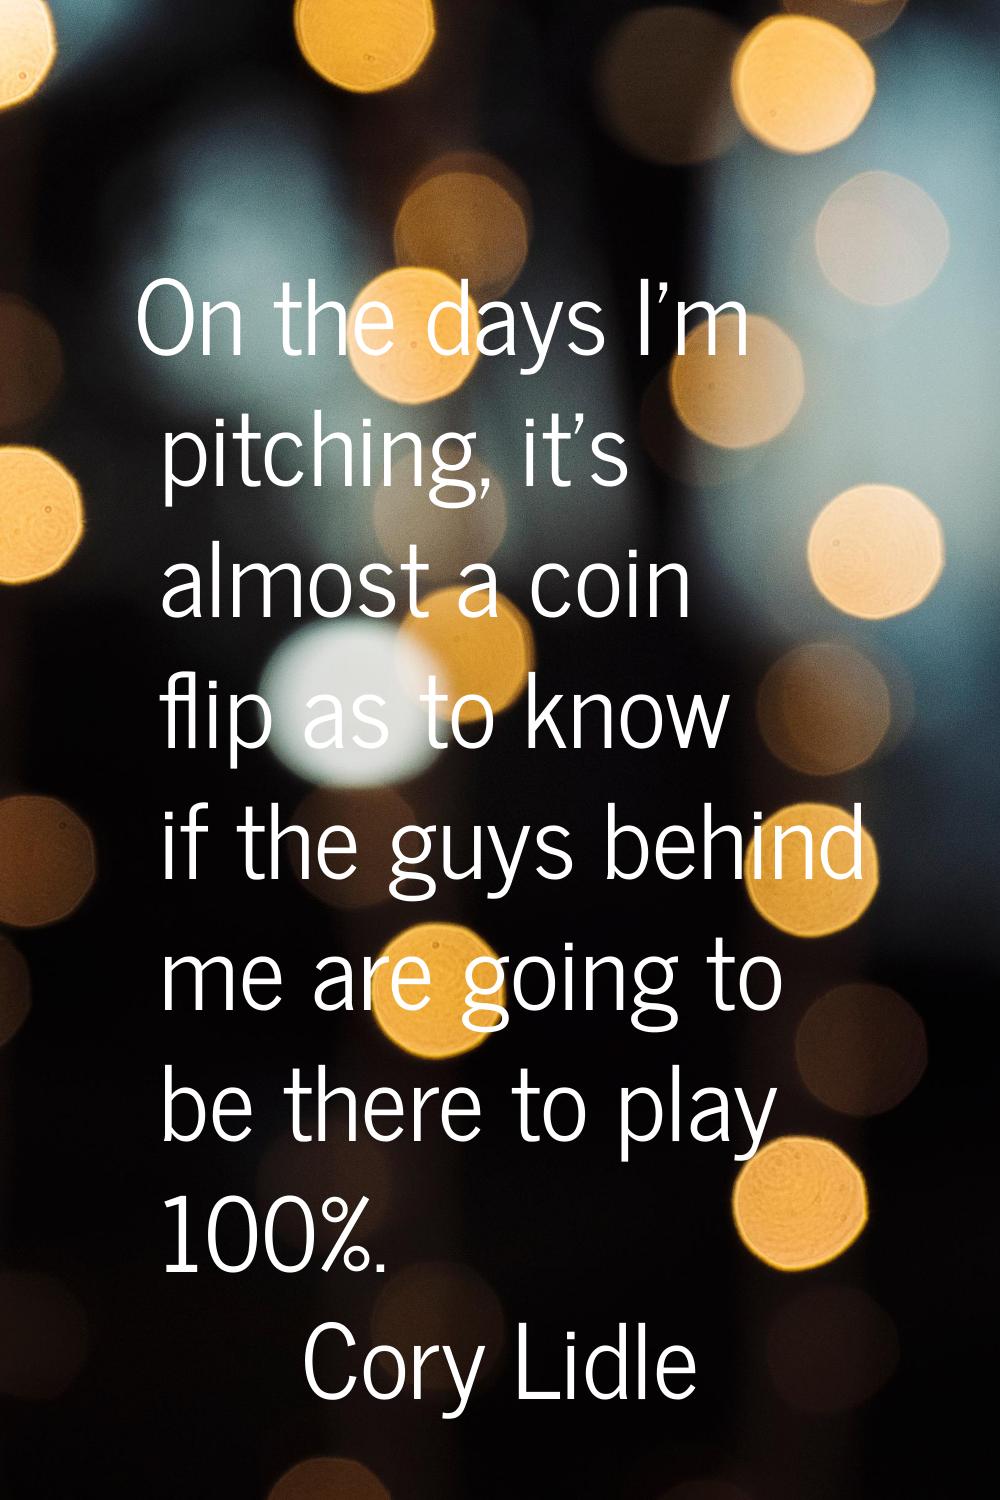 On the days I'm pitching, it's almost a coin flip as to know if the guys behind me are going to be 